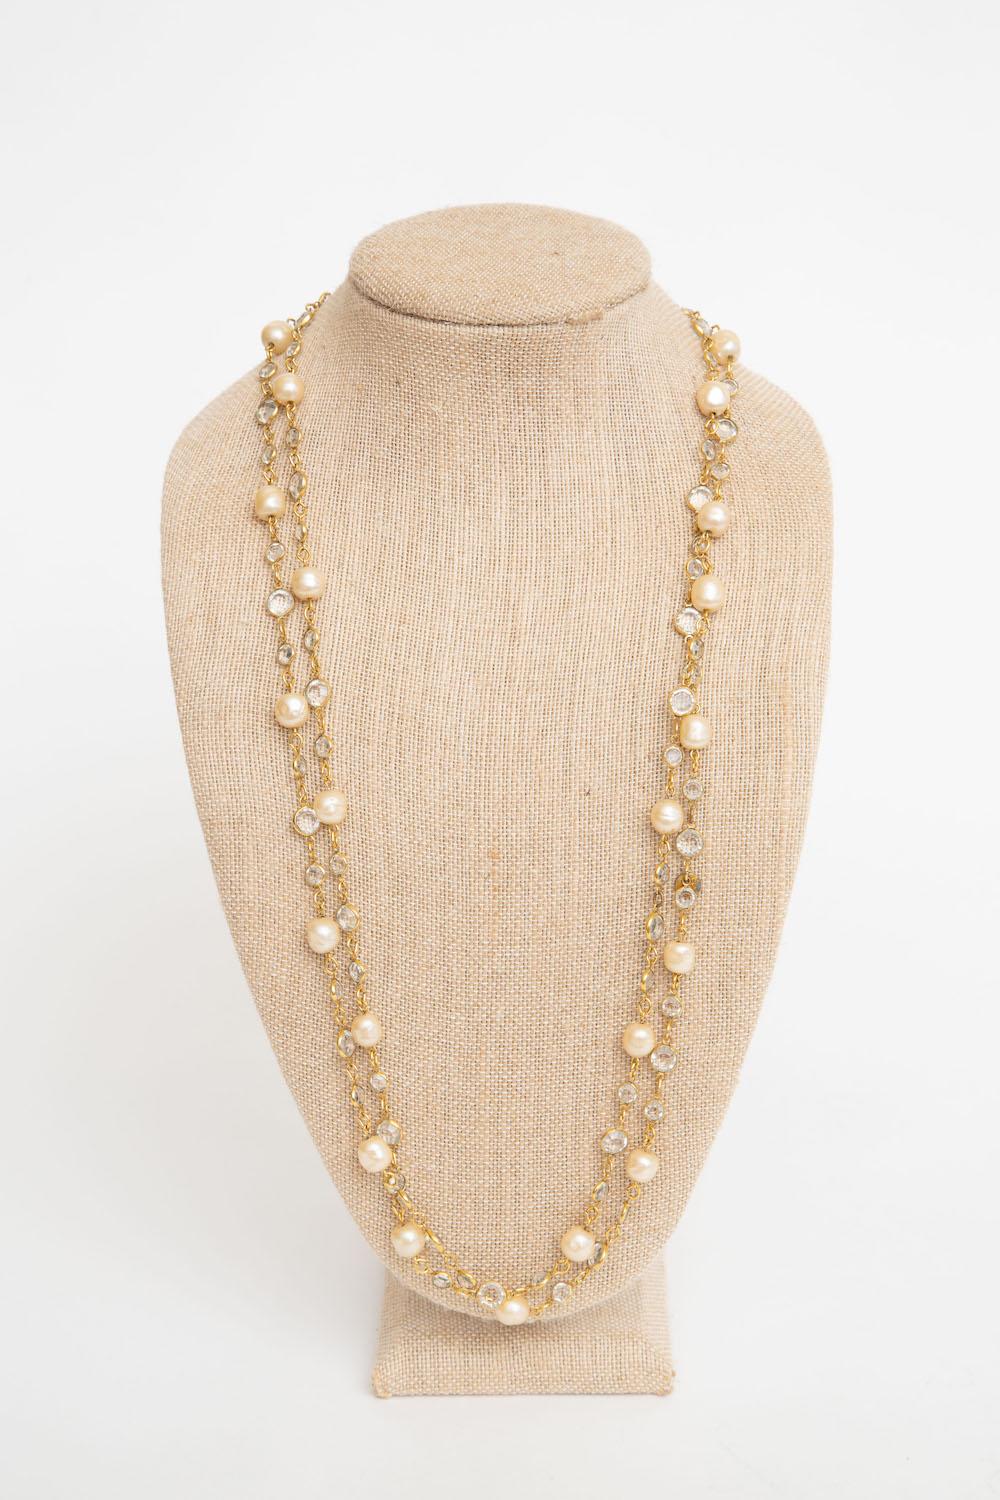 Bead Chanel Vintage Clear Beveled Crystal and Faux Pearl Sautoir Link Necklace  For Sale